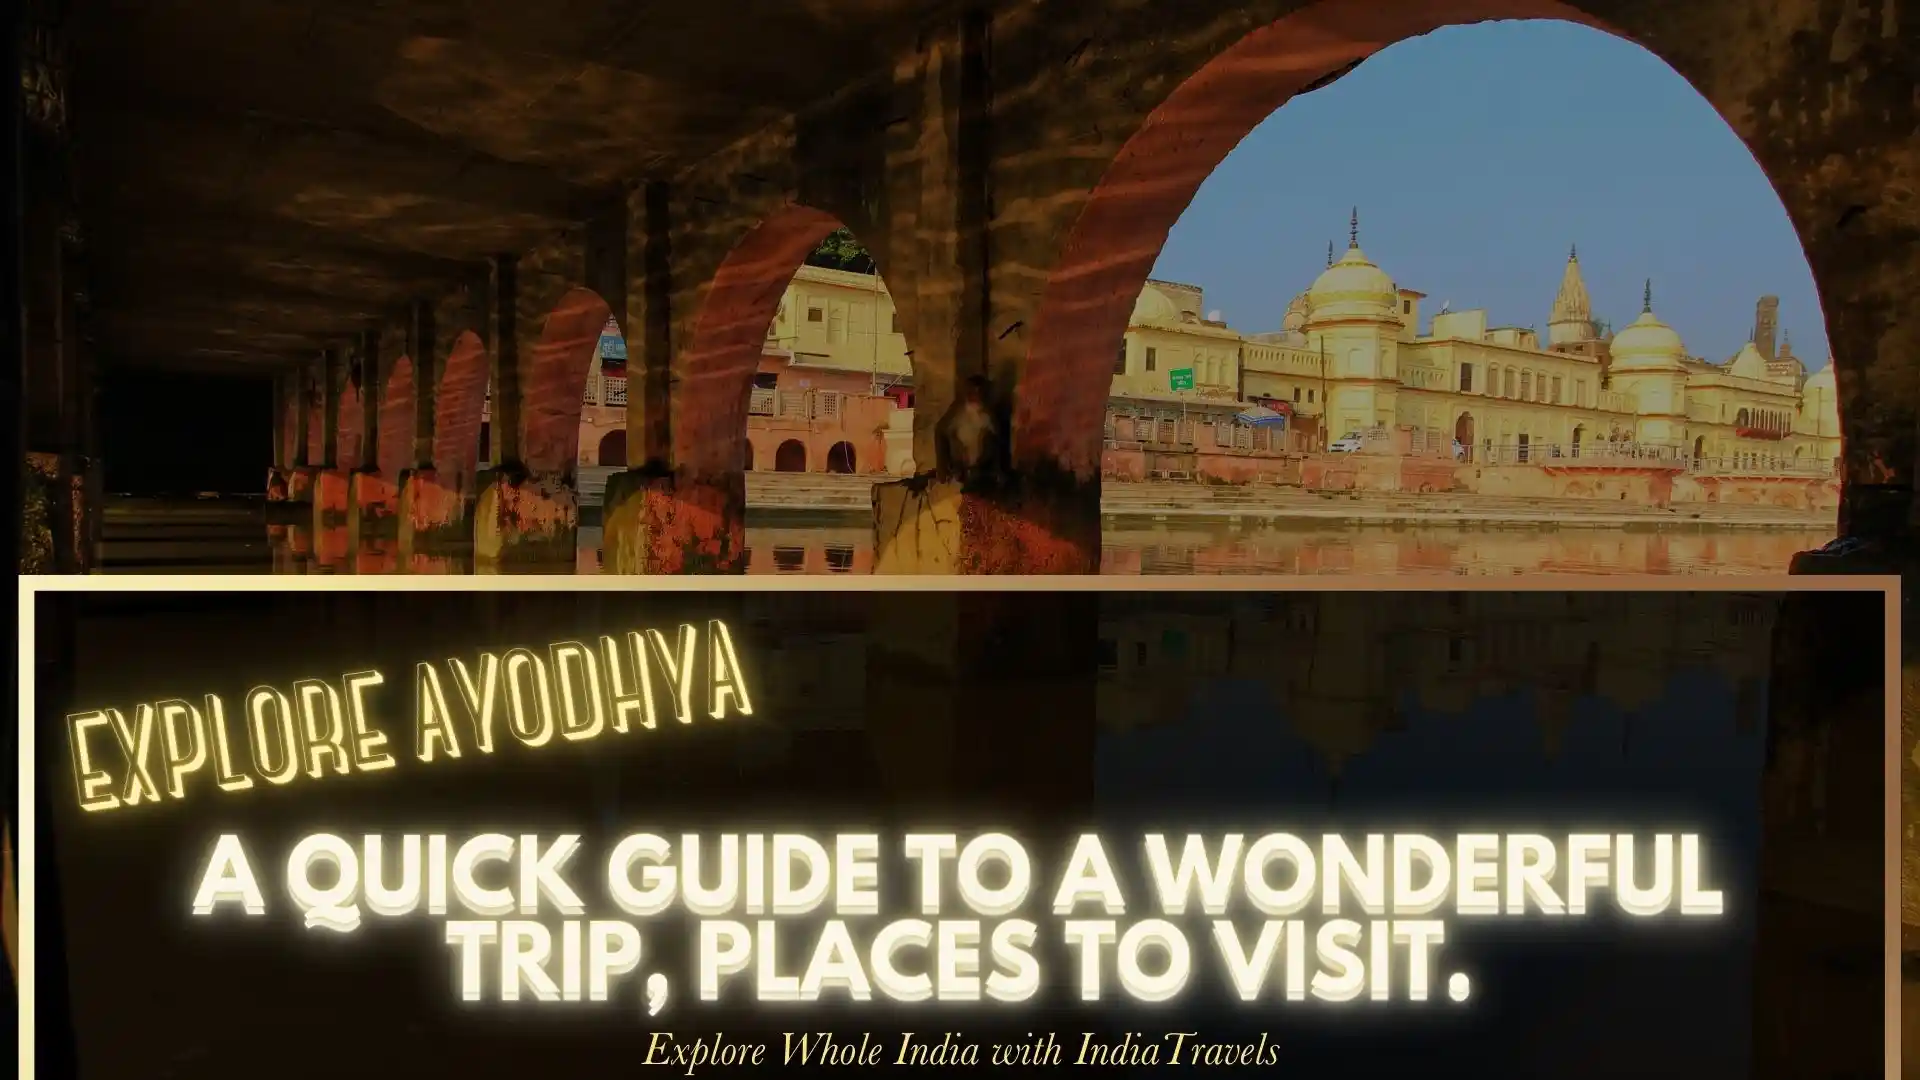 Explore Ayodhya: A Quick Guide to a Wonderful Trip, Places to Visit.